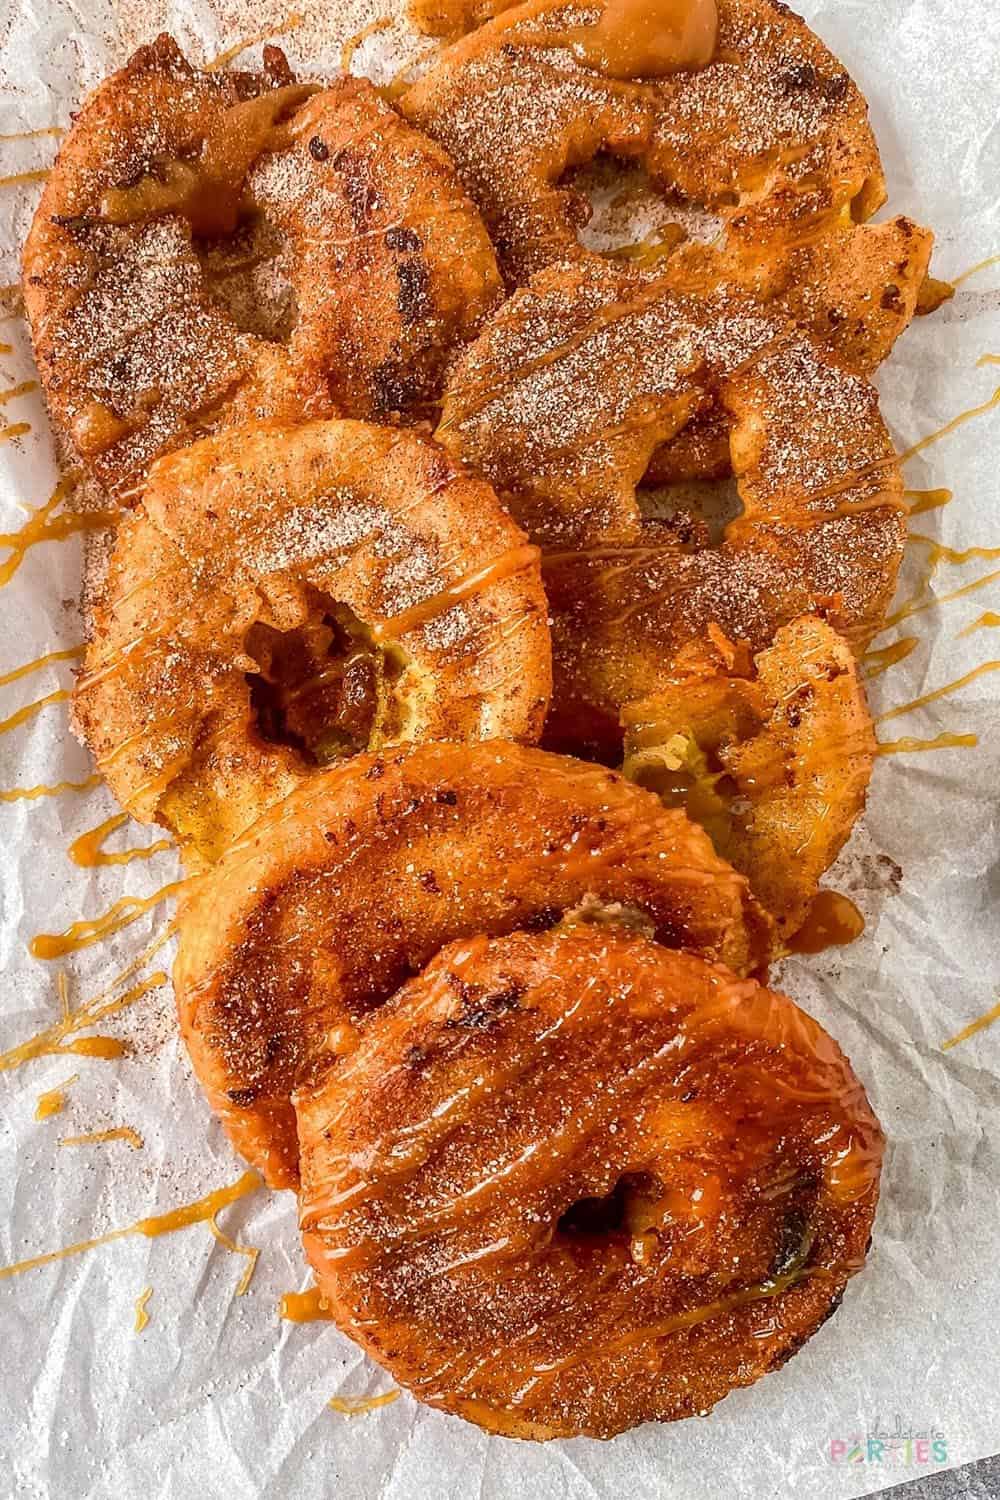 Overhead view of a pile of fried apple rings drizzled with caramel.